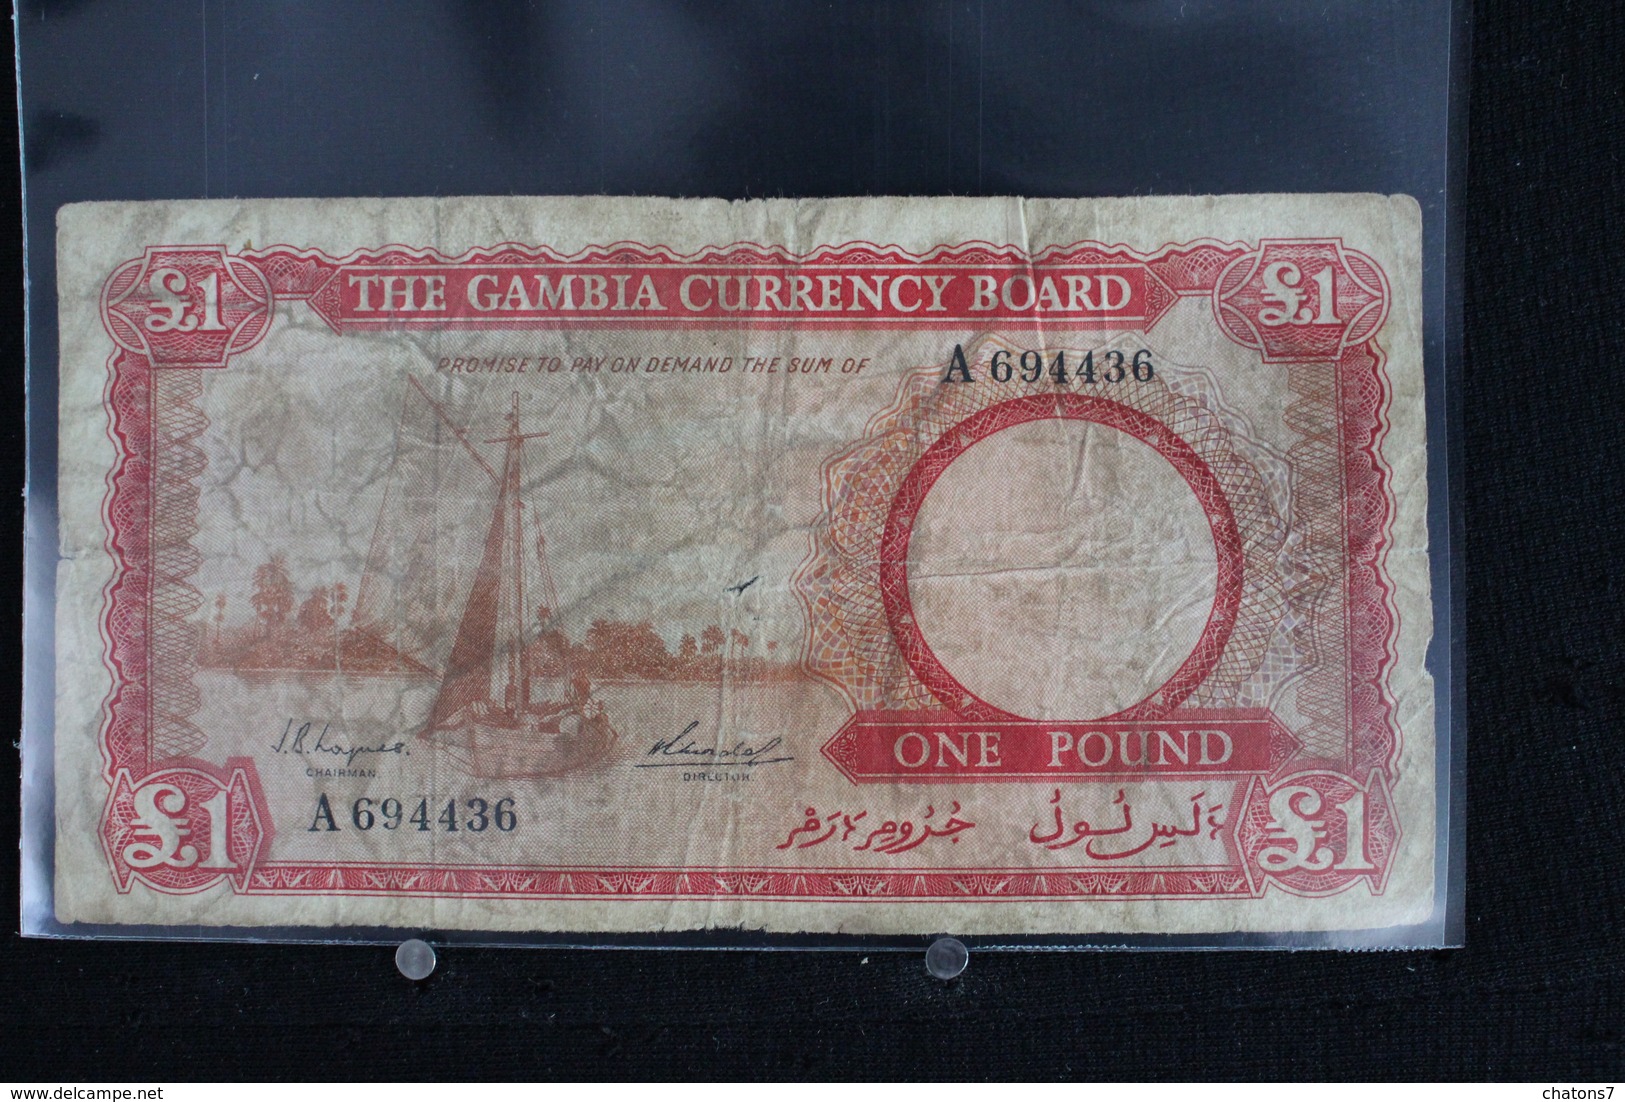 M-An / Billet  - The Gambia Currency Board - ONE POUND  ( £1 ) /  Année ? - Gambie